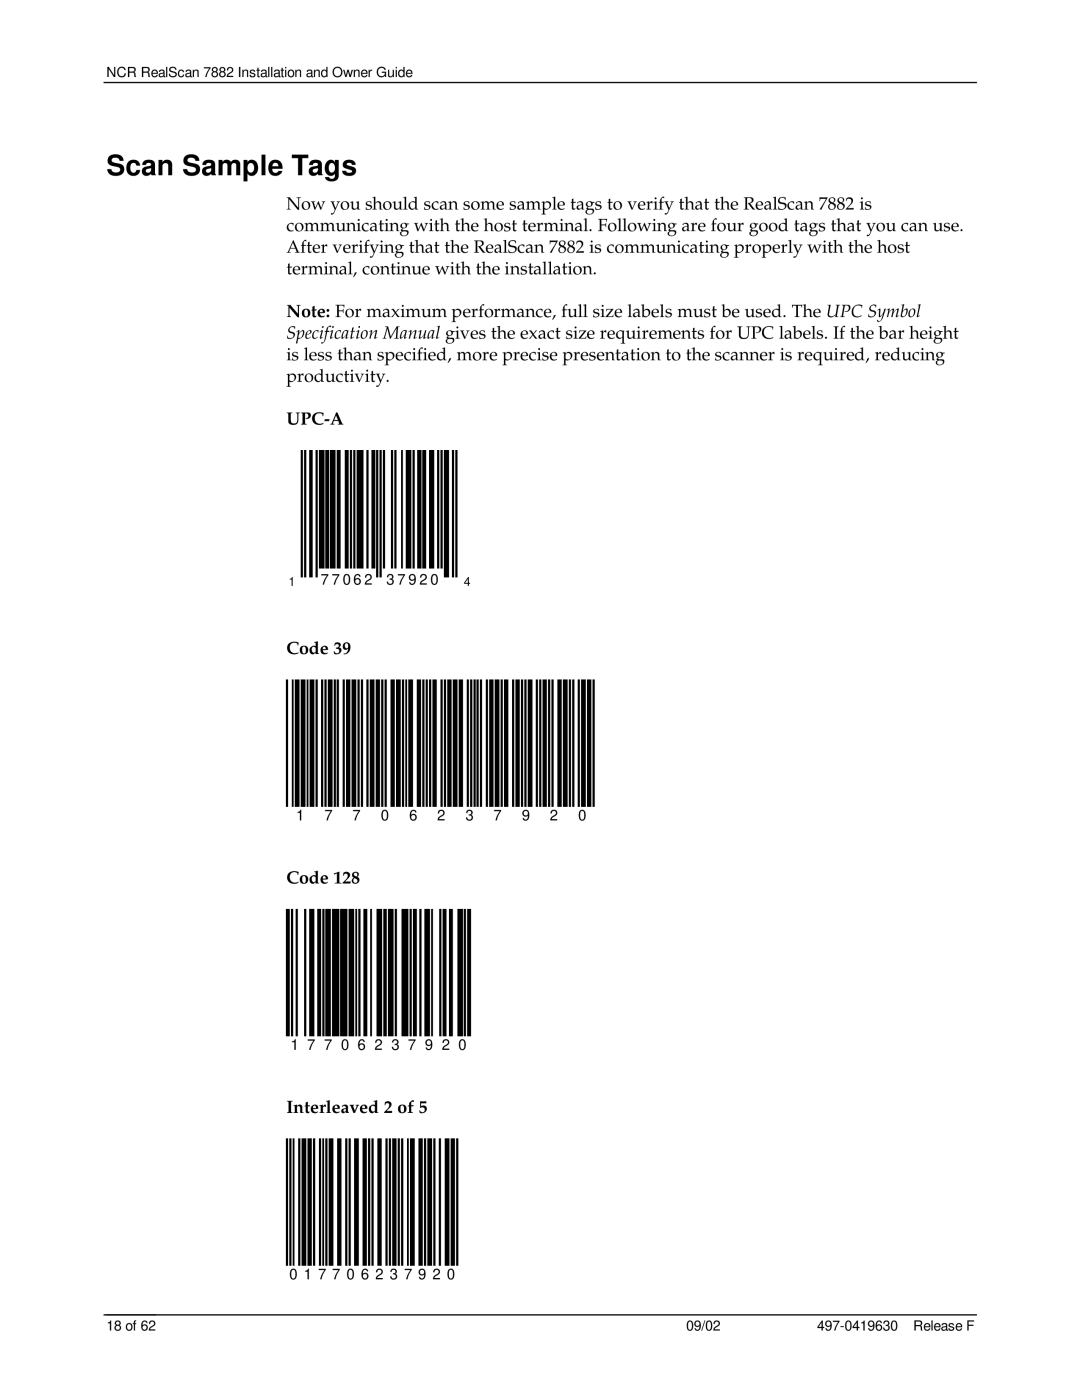 NCR 7882 manual Scan Sample Tags, Upc-A, Code, Interleaved 2 of 